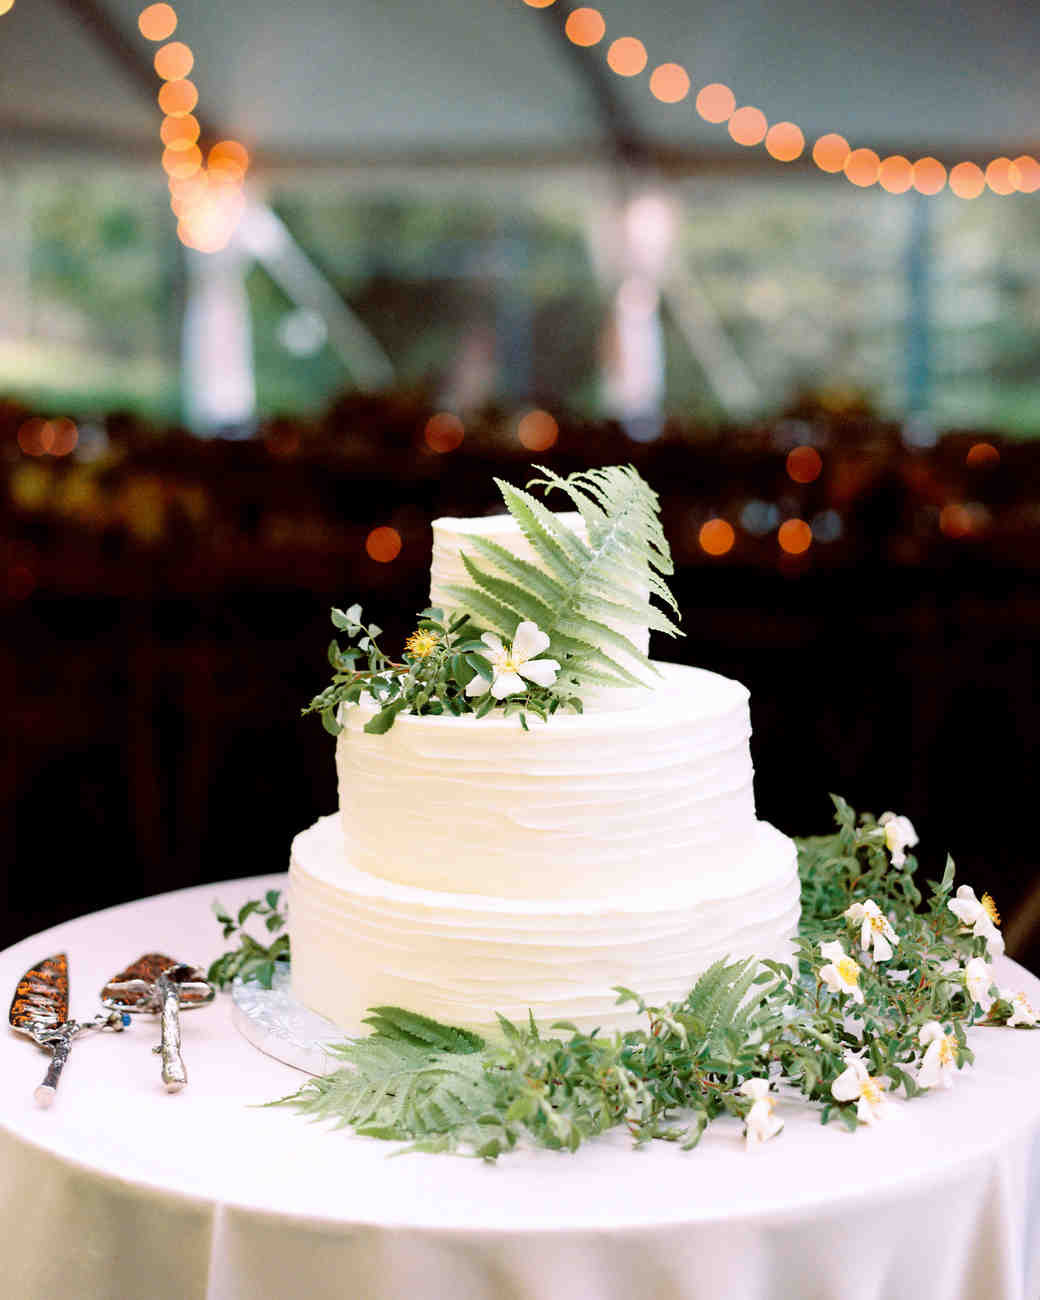 Wedding Cake Pics
 Spring Wedding Cakes That Are Almost Too Pretty to Eat